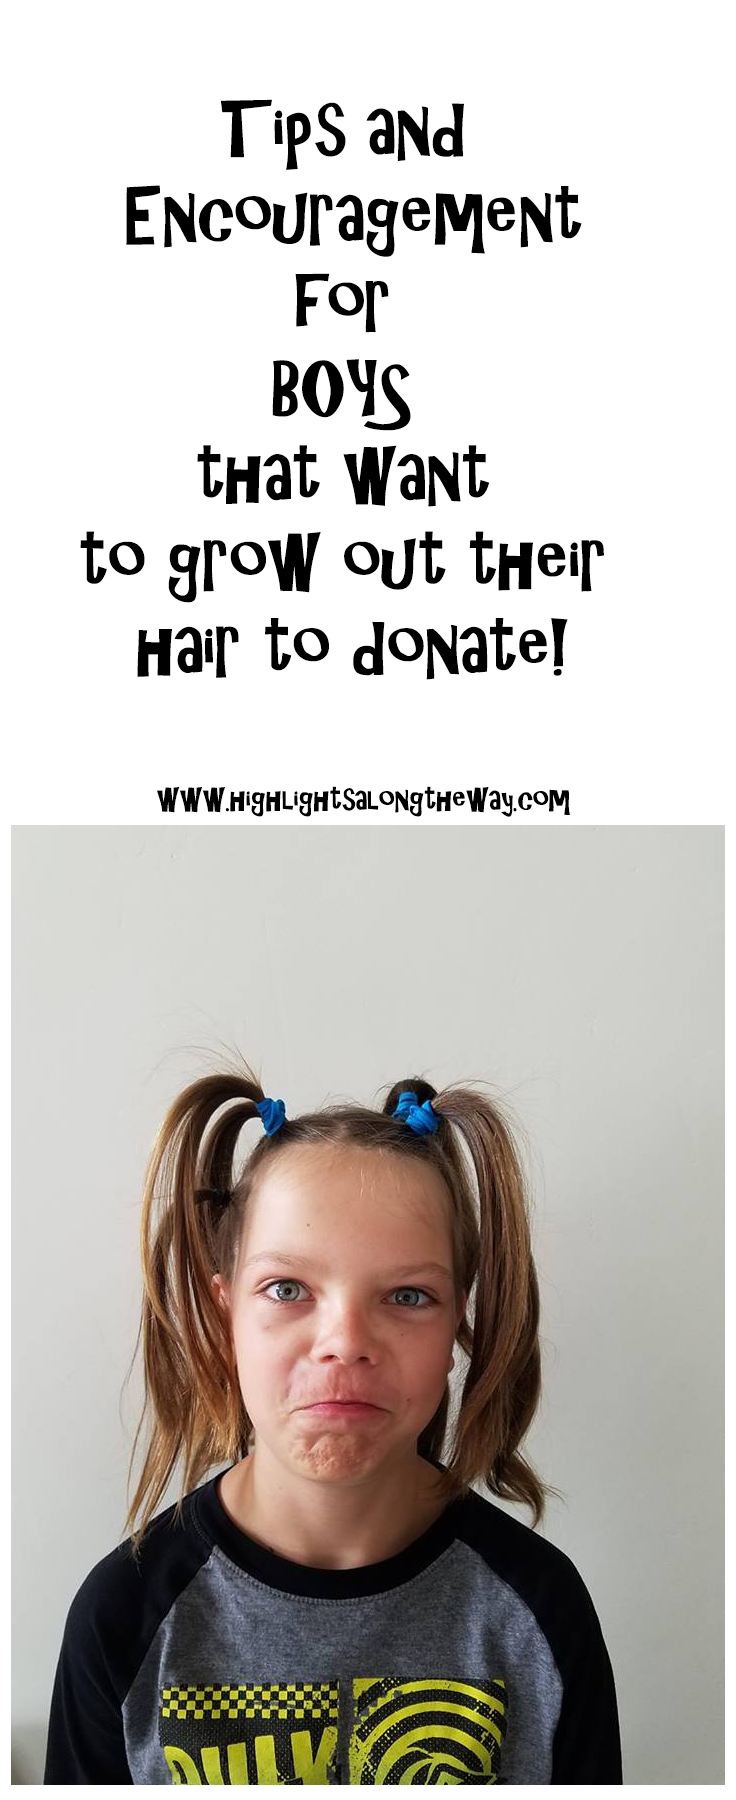 tips fpr boys that are considering growing their hair out to donate!